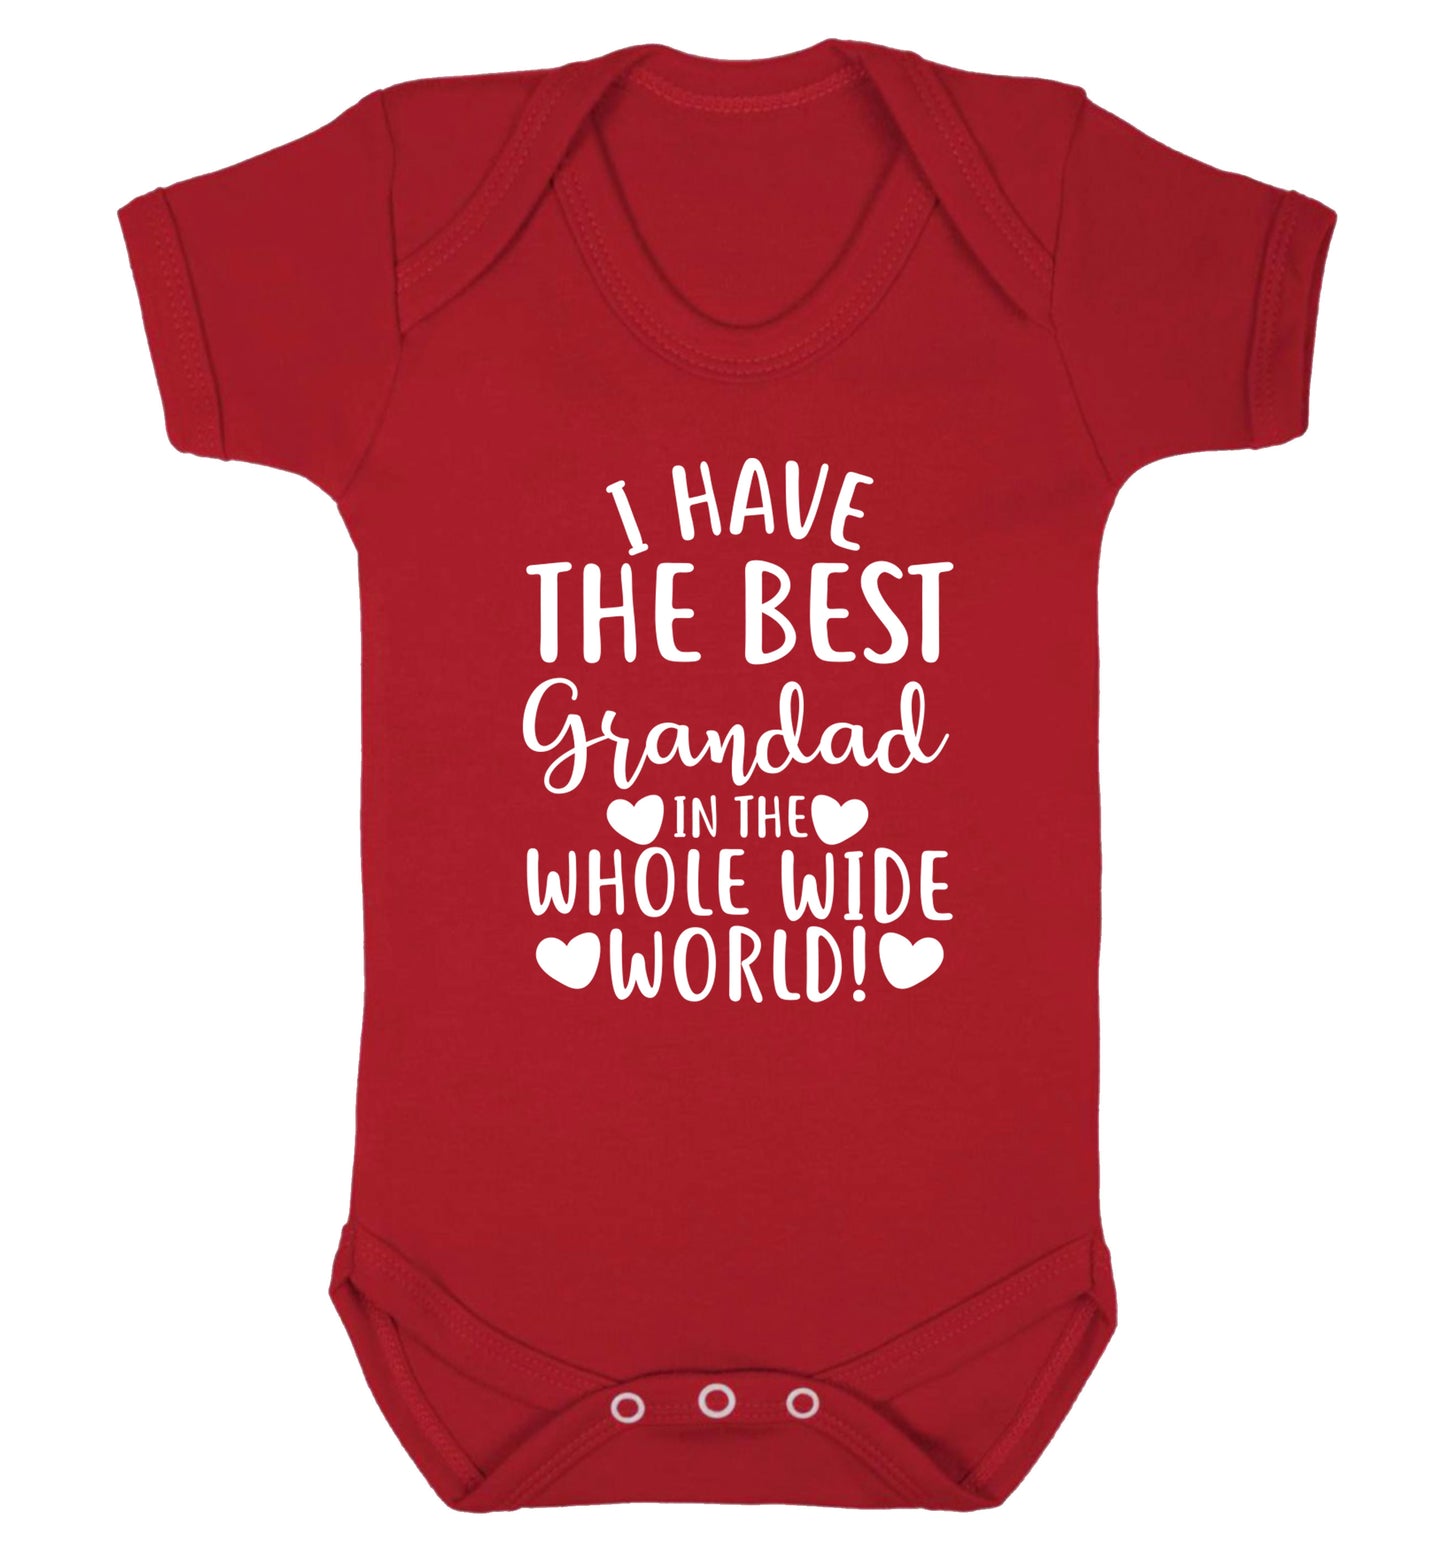 I have the best grandad in the whole wide world! Baby Vest red 18-24 months